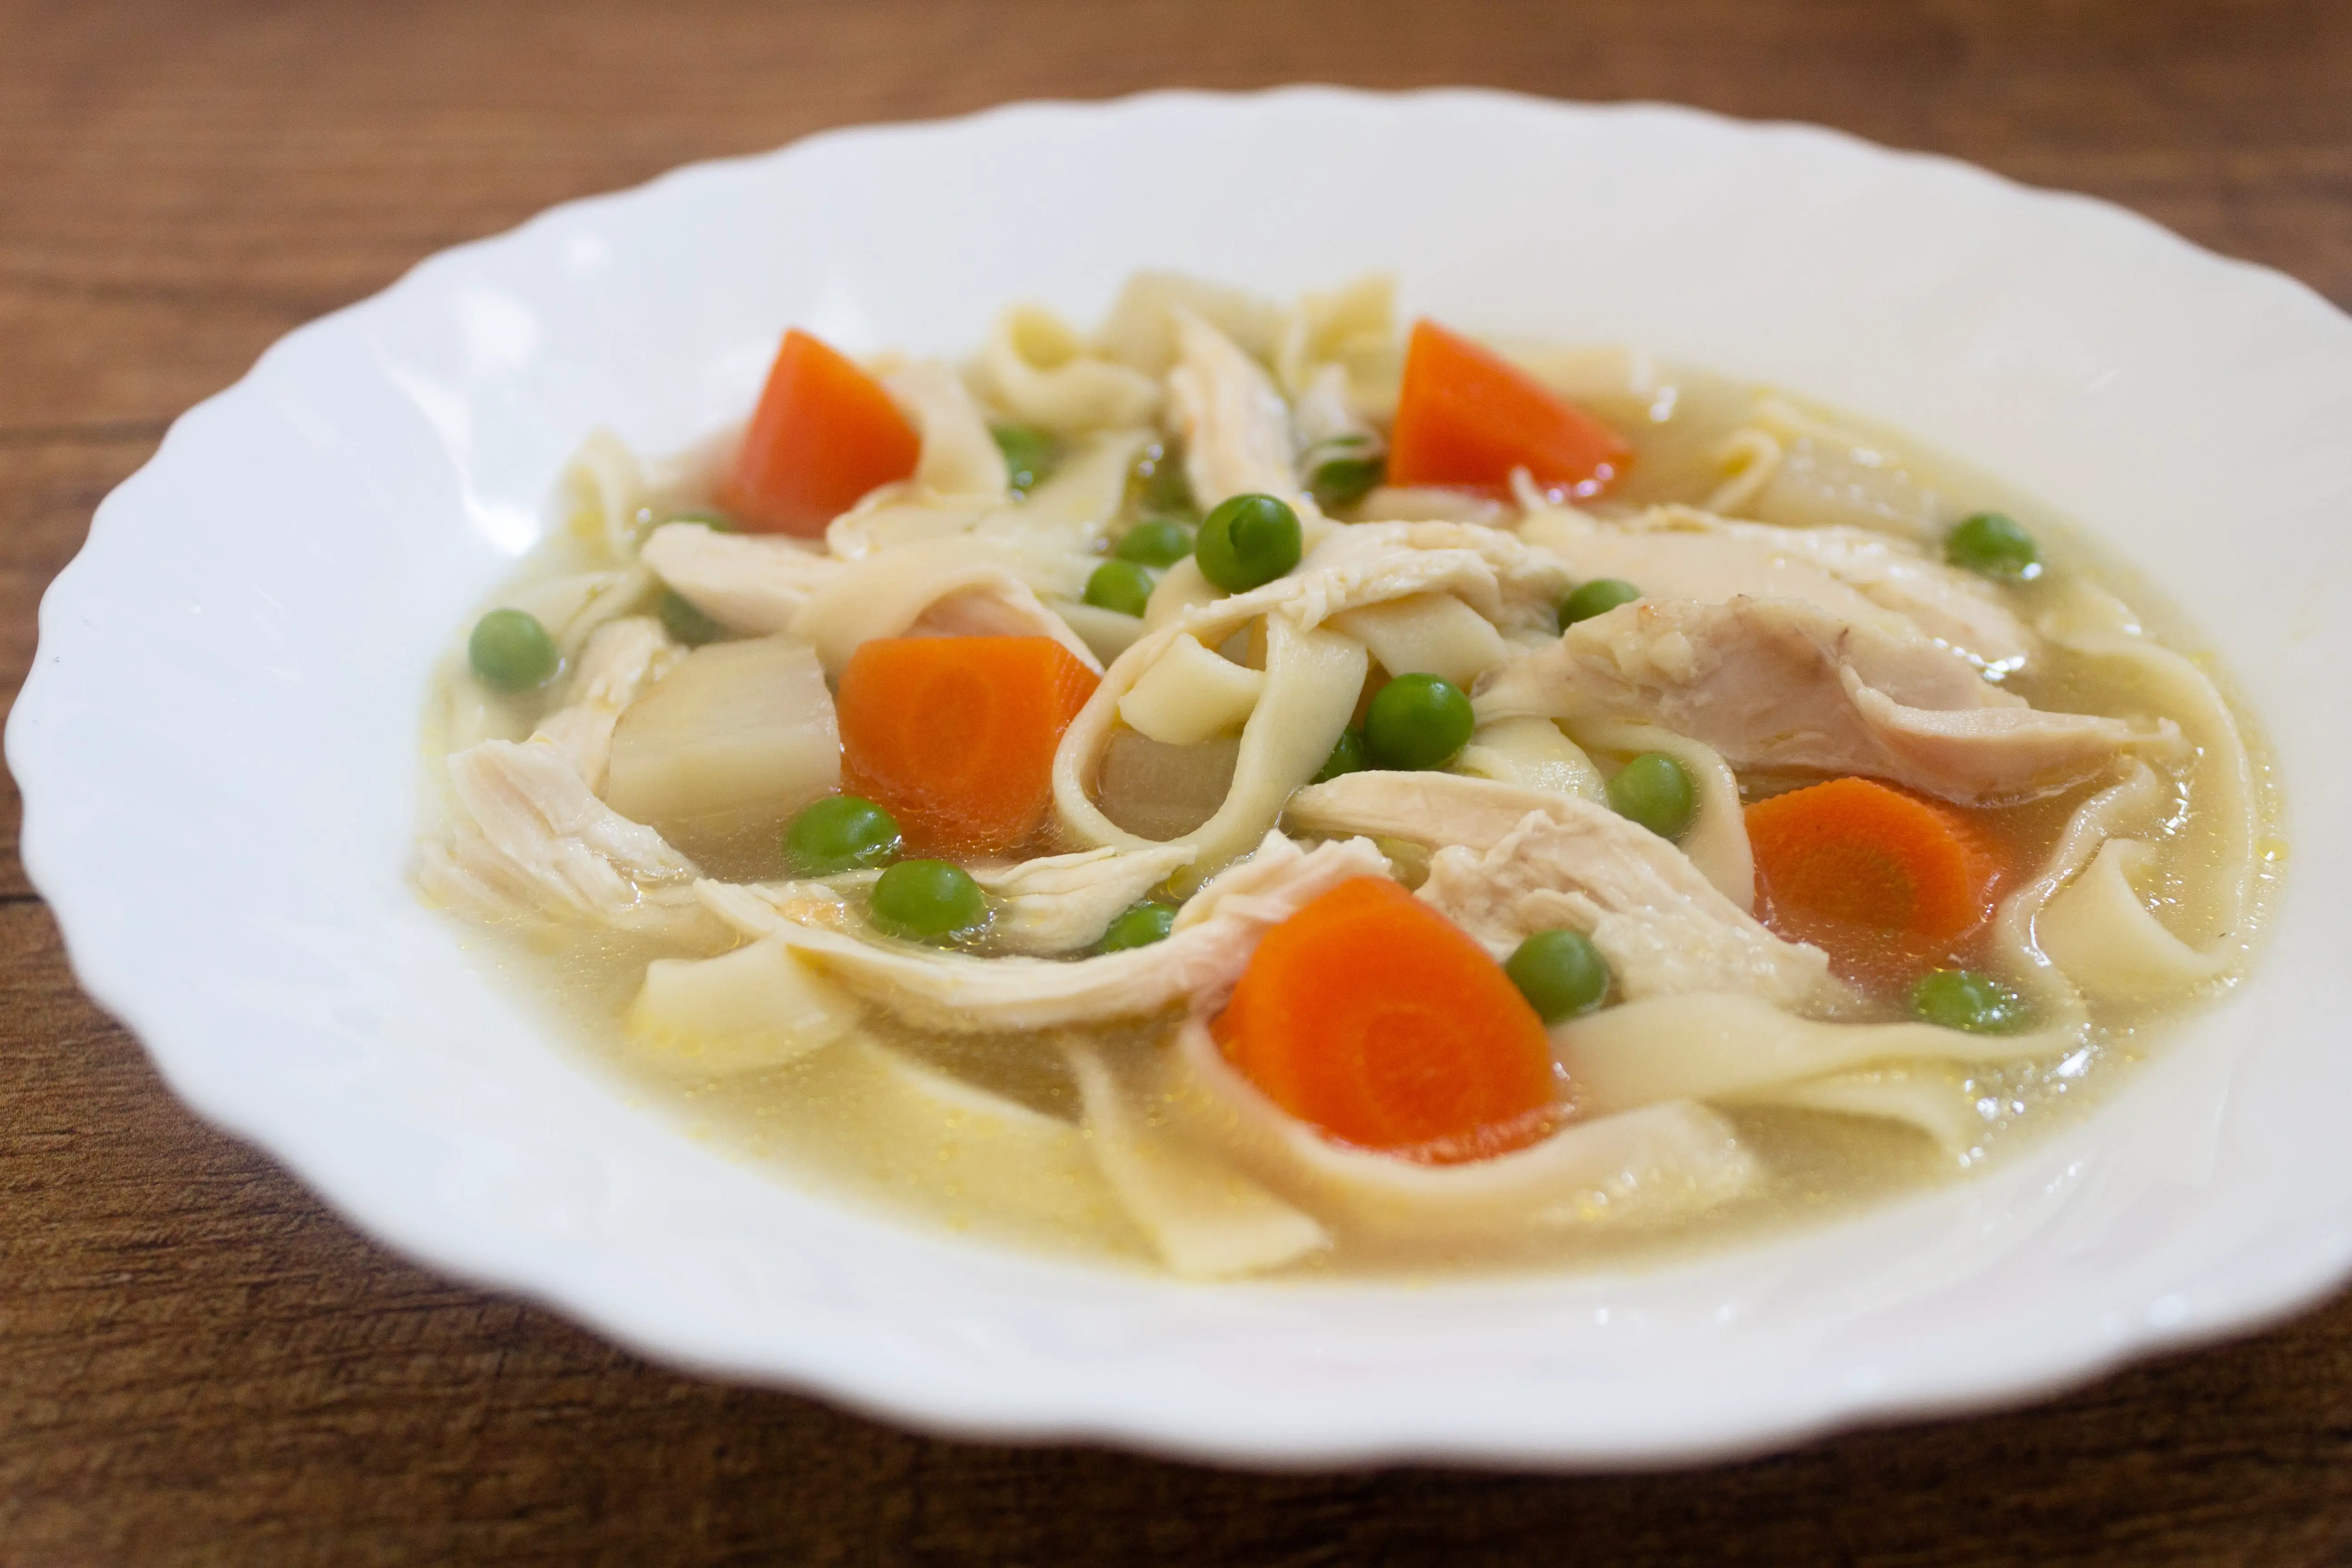 Chicken Noodle Soup With Peas, Carrots, and Parsley Roots (‘Hühnersuppe mit Nudeln und Gemüseeinlage’)